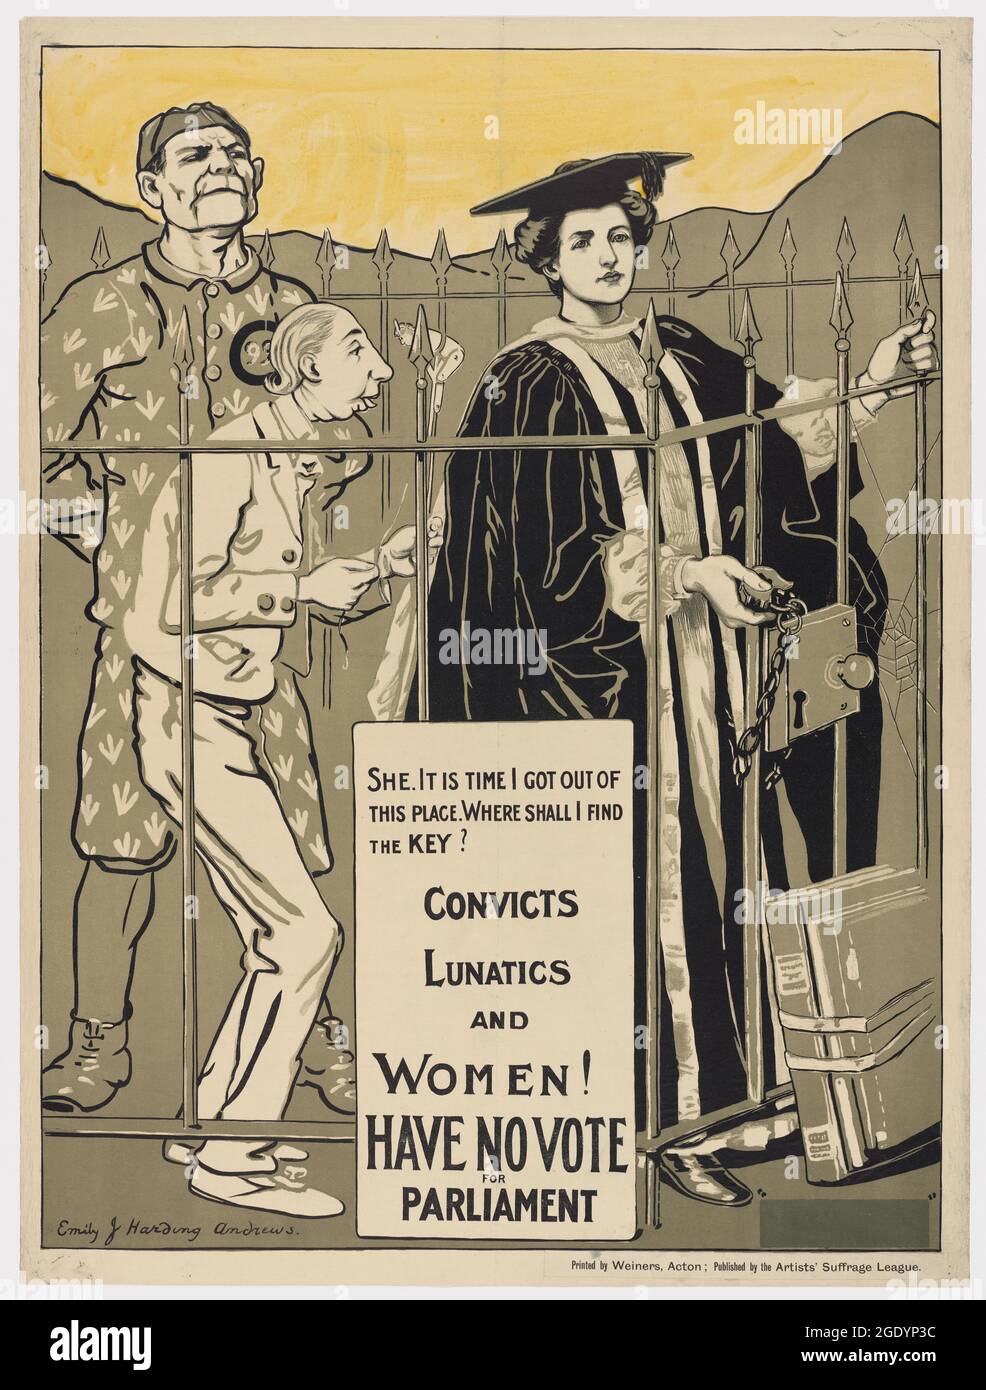 She. It is time I got out of this place. Where Shall I Find The Key? Convicts Lunatics and Women! Have no vote for Parliament. Ca. 1890-1918. Stock Photo